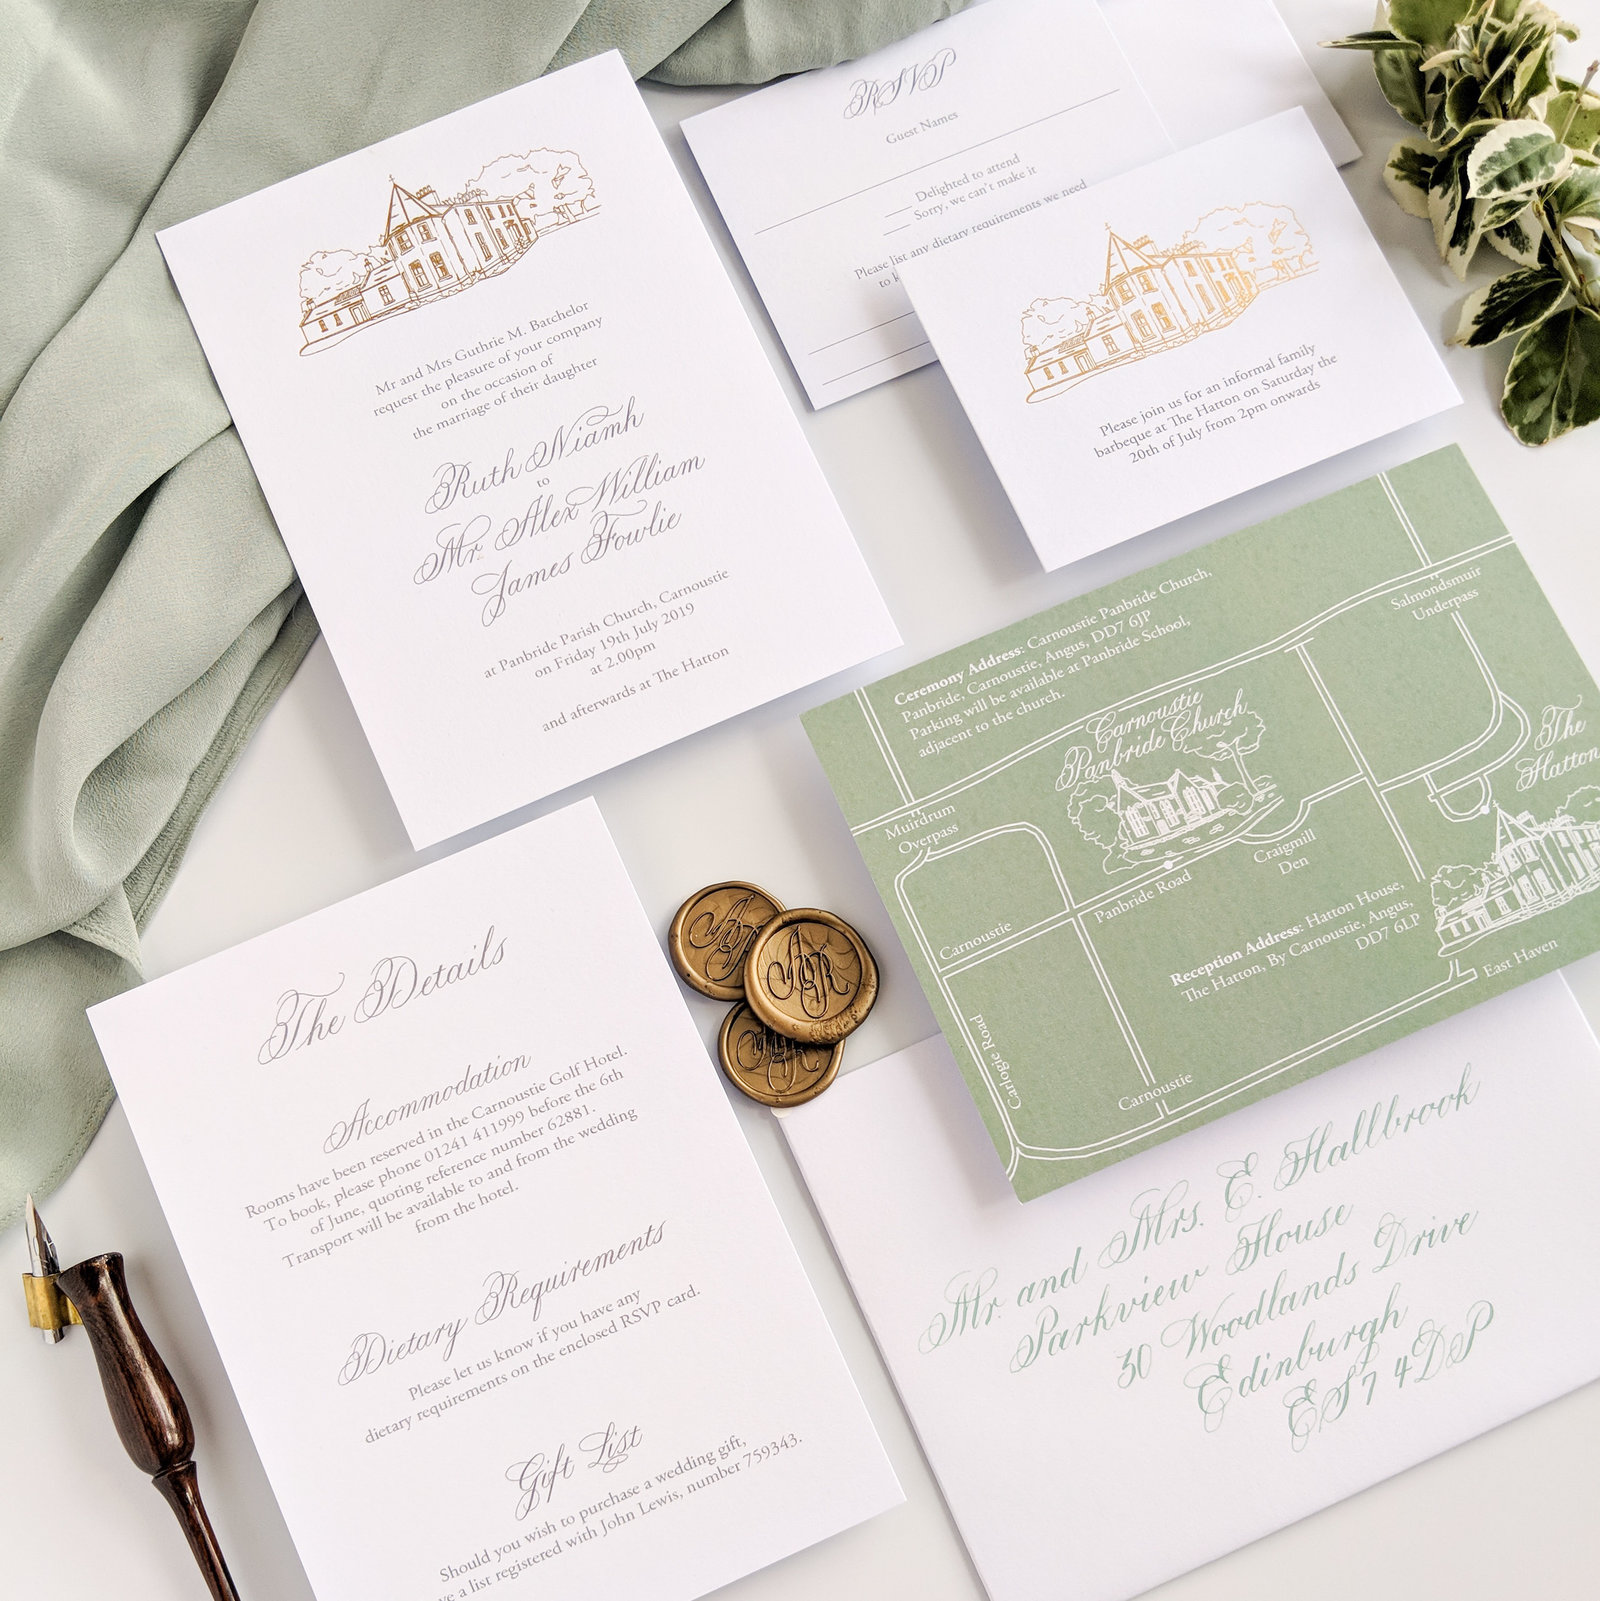 Green and gold wedding invitations for a Scottish wedding